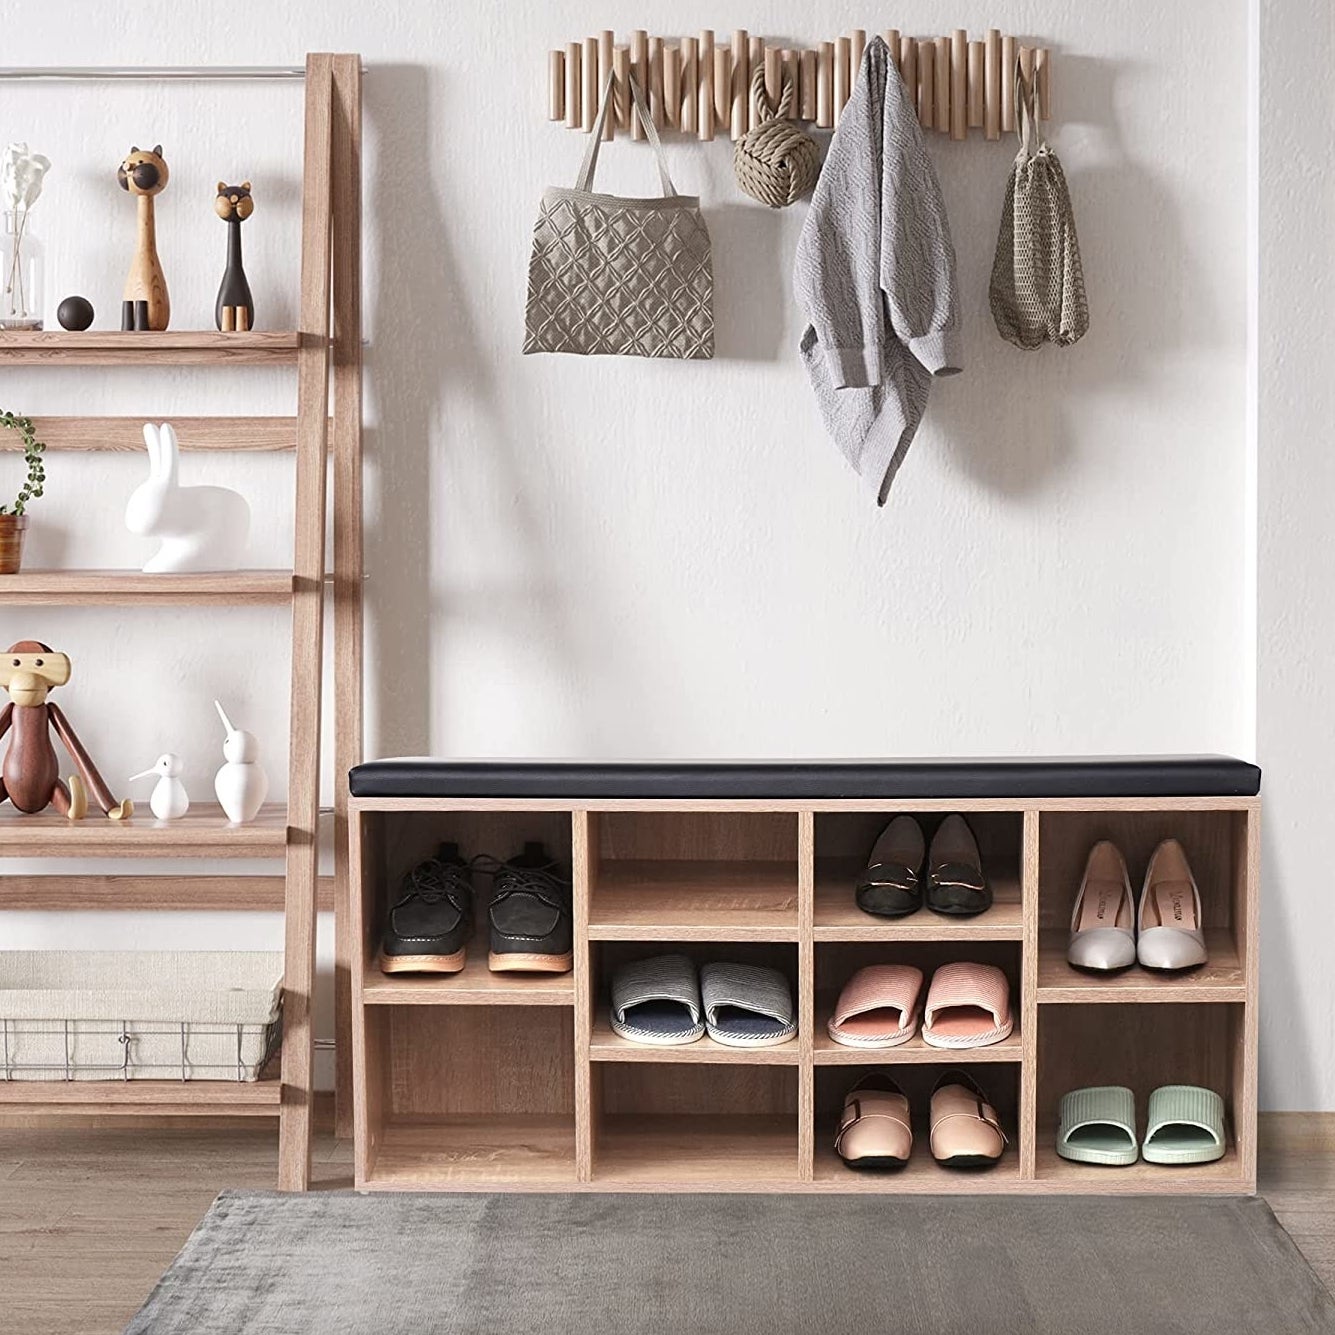 a shoe bench shelf with shoes in them